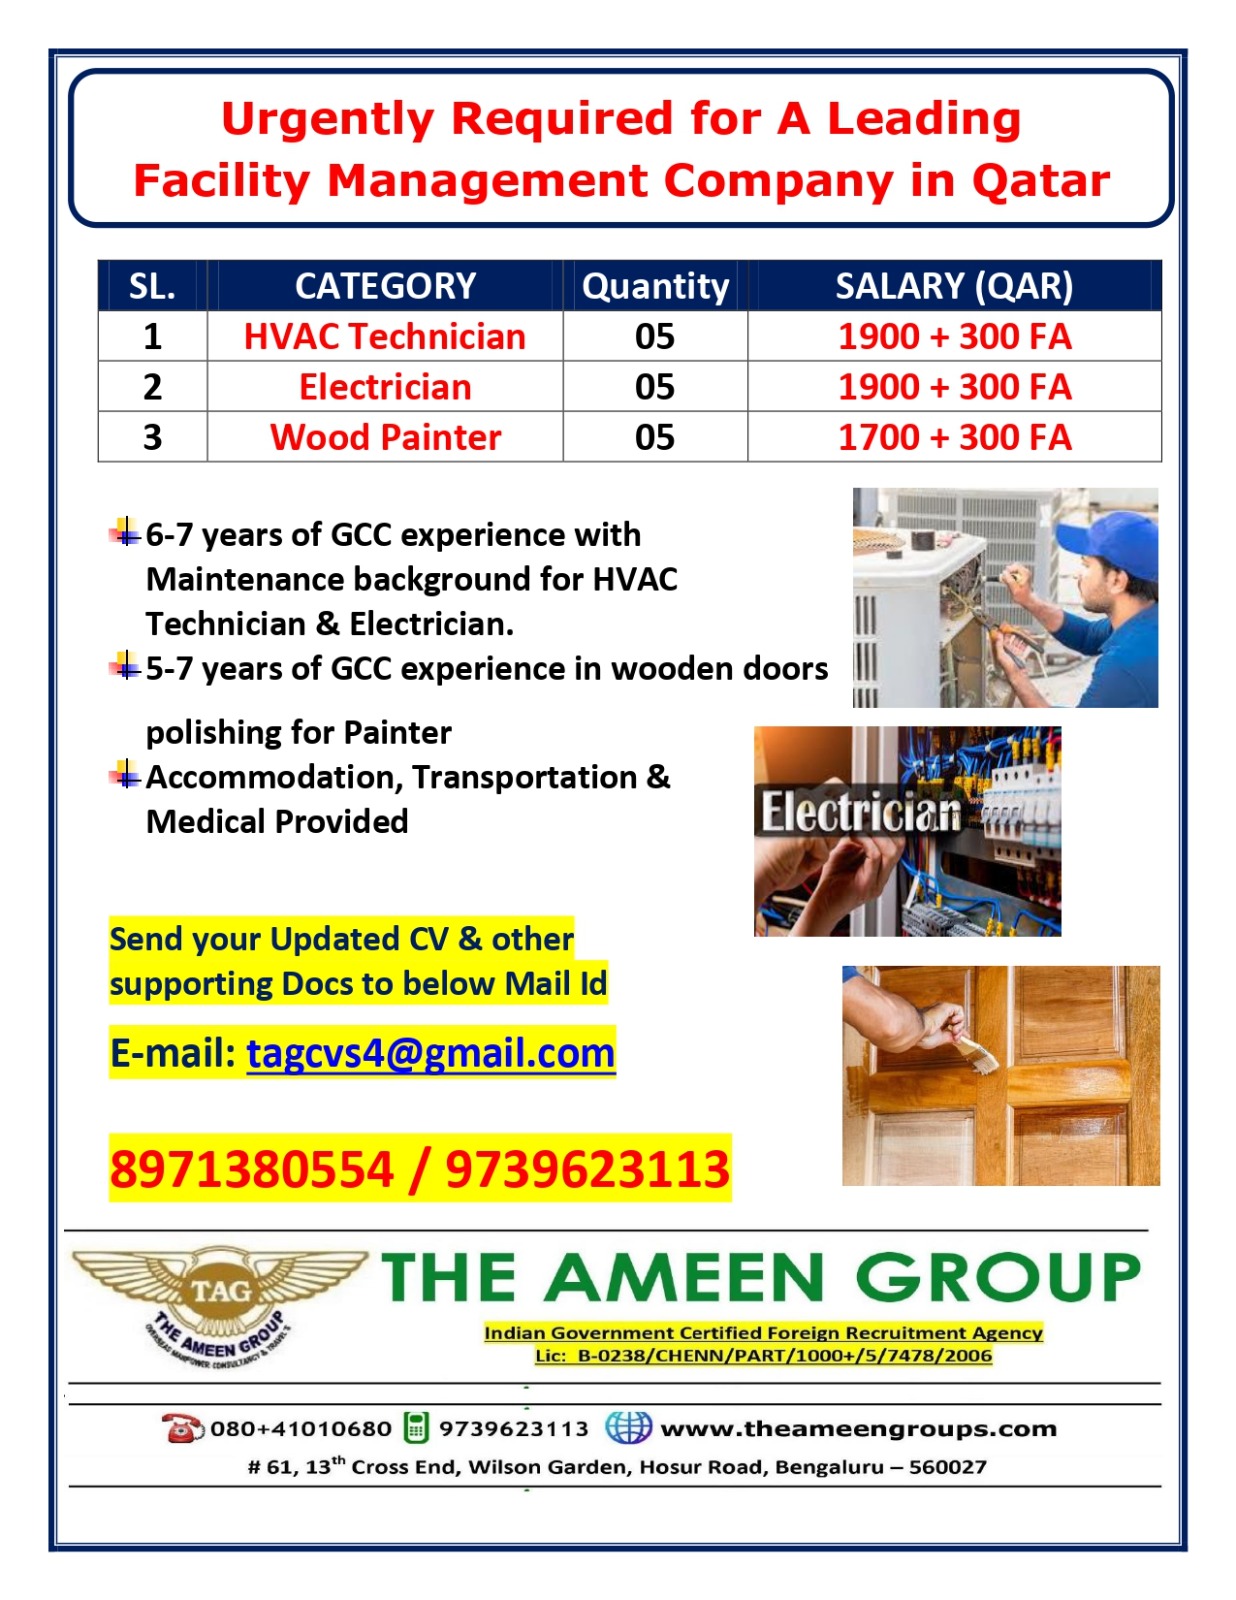 URGENTLY REQUIRED FOR QATAR